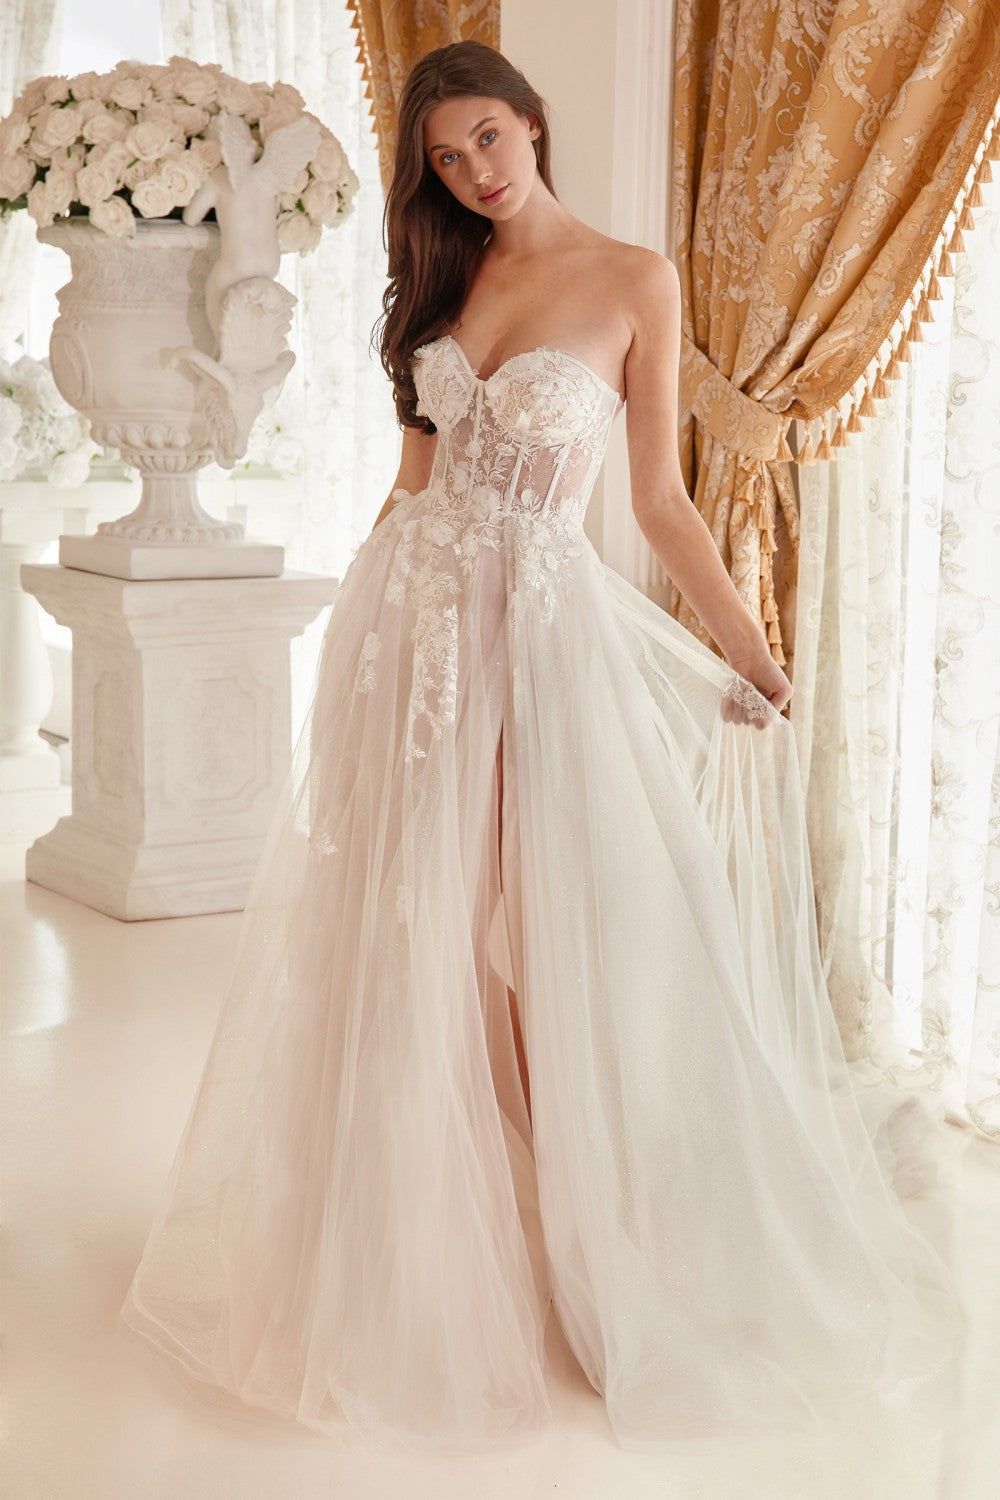 You'll capture your guest's attention in this 3D floral applique long strapless off white dress with A-line slit skirt by Andrea & Leo A1089W. This beautiful gown features a strapless sweetheart bodice with sheer corset boning, open back, and a floor length A-line skirt that ends in a sweep train.